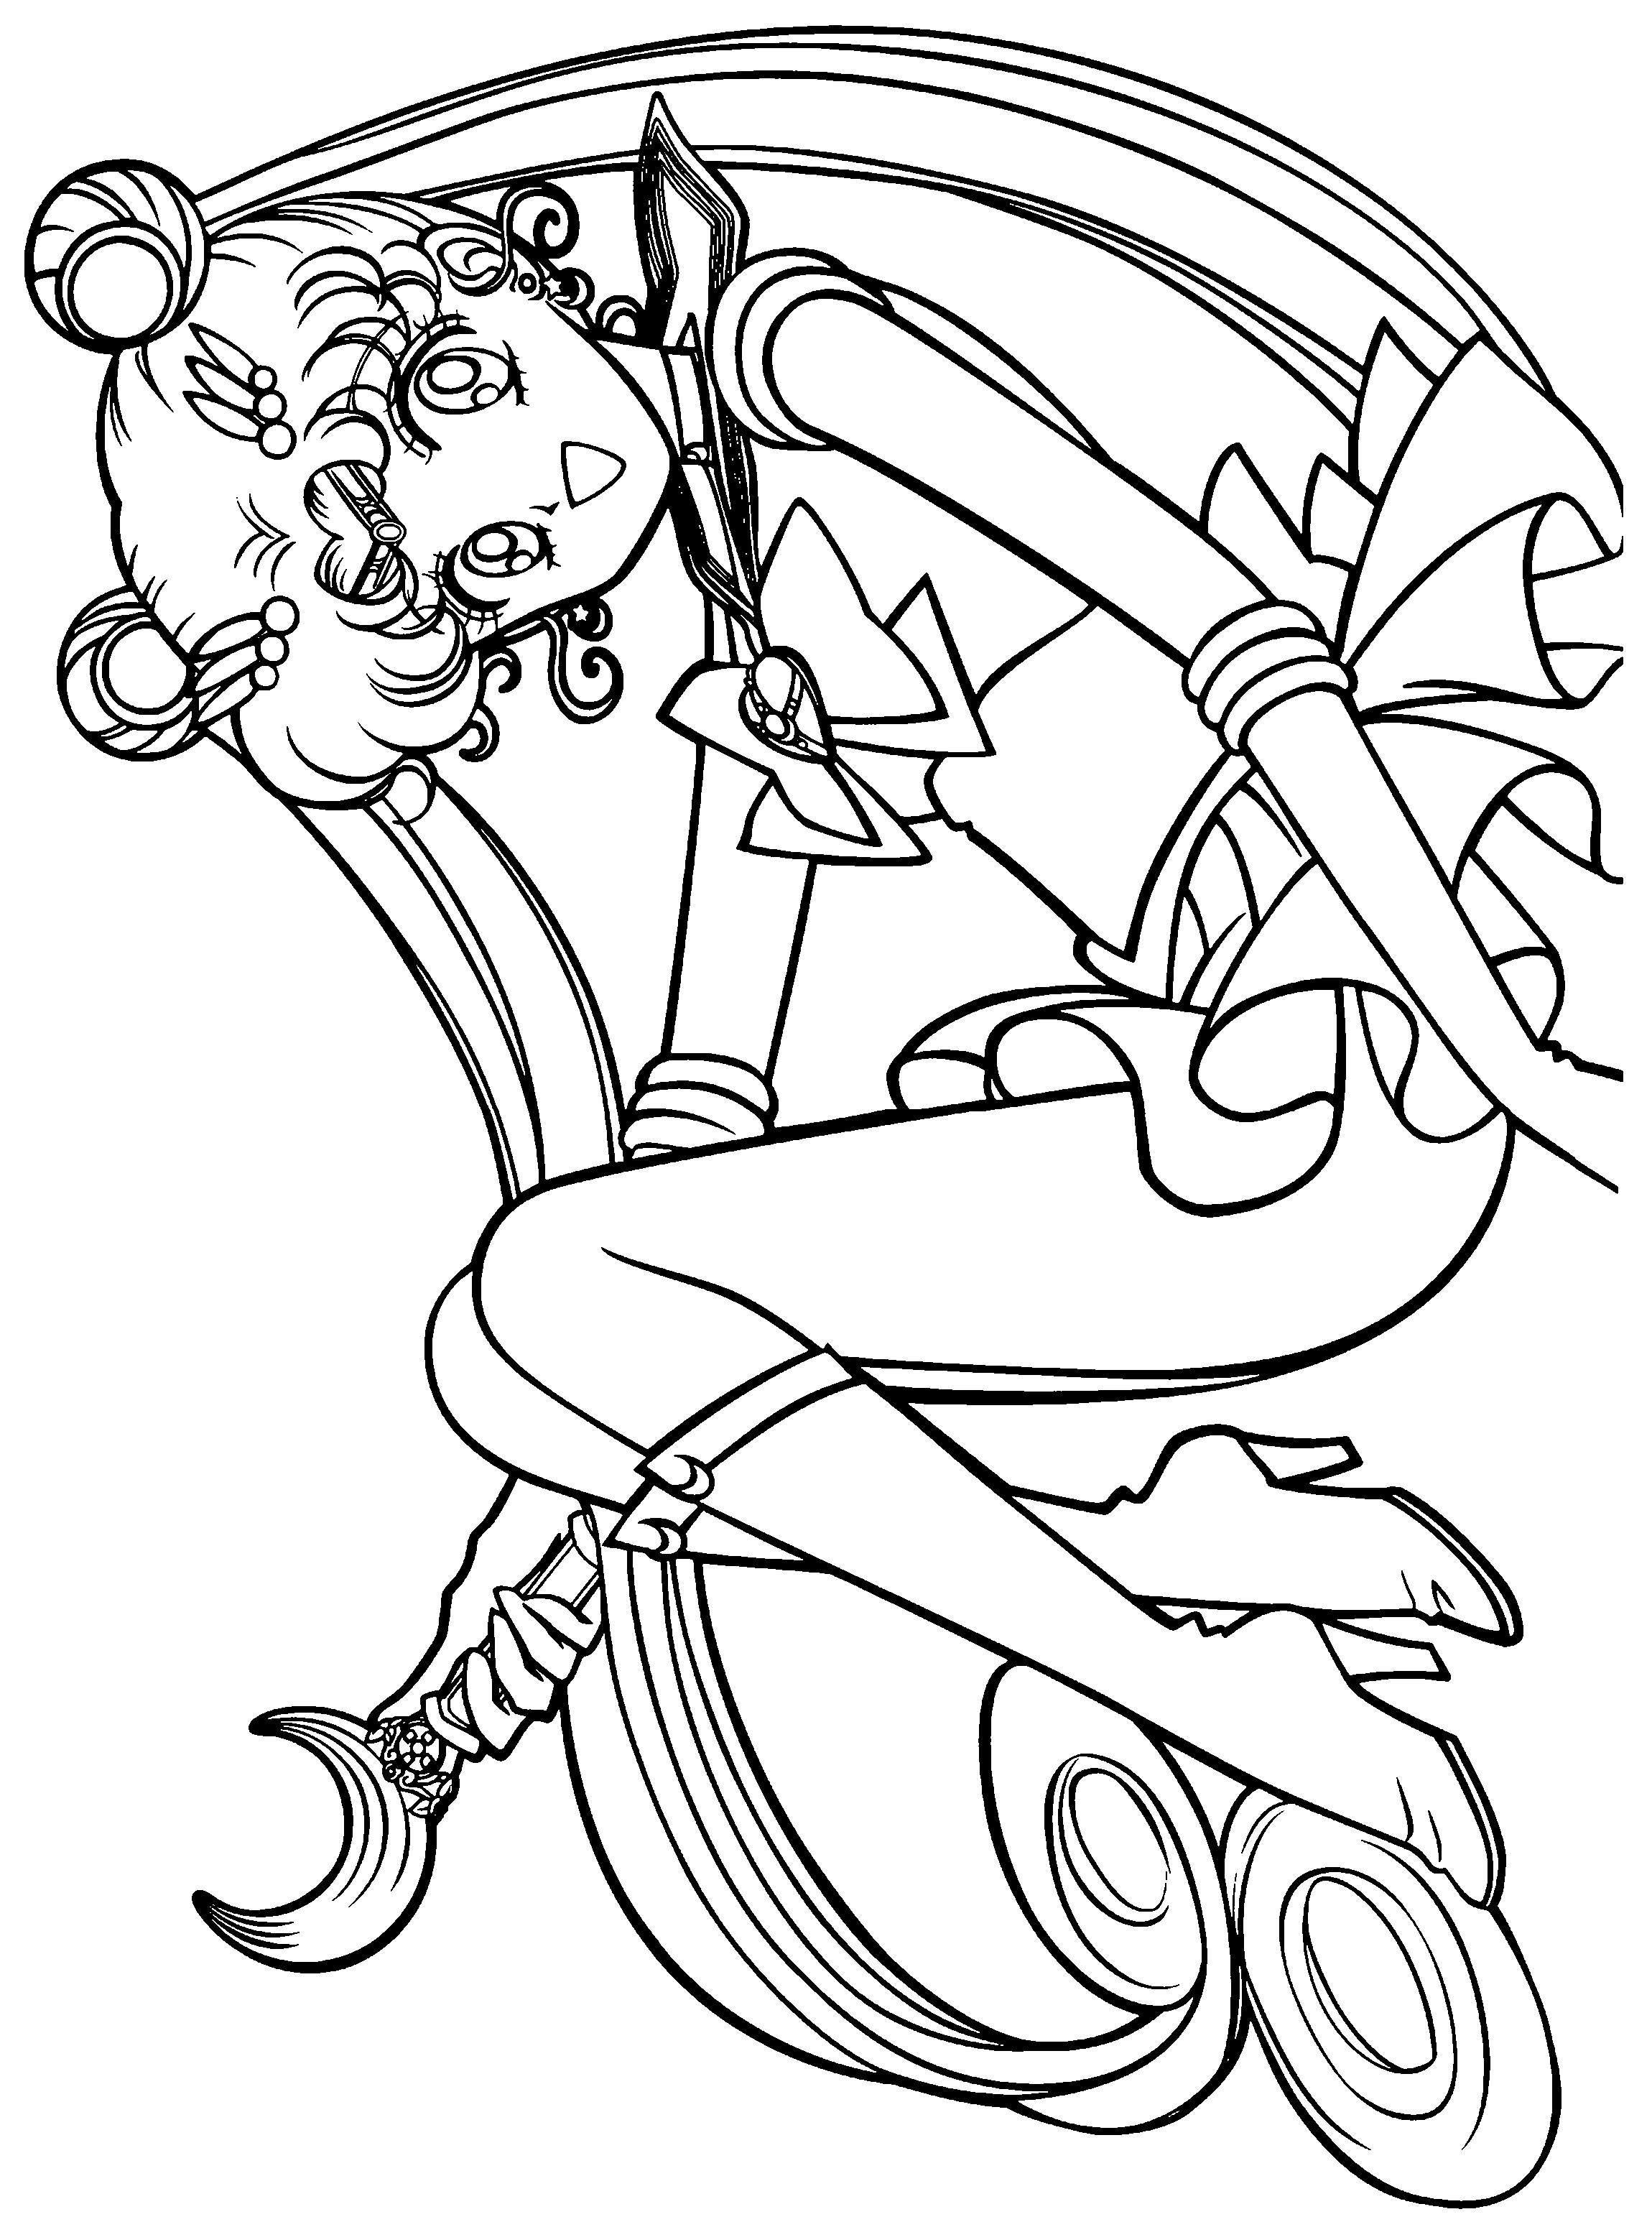 sailor-moon coloring pages for kids,printable,coloring pages